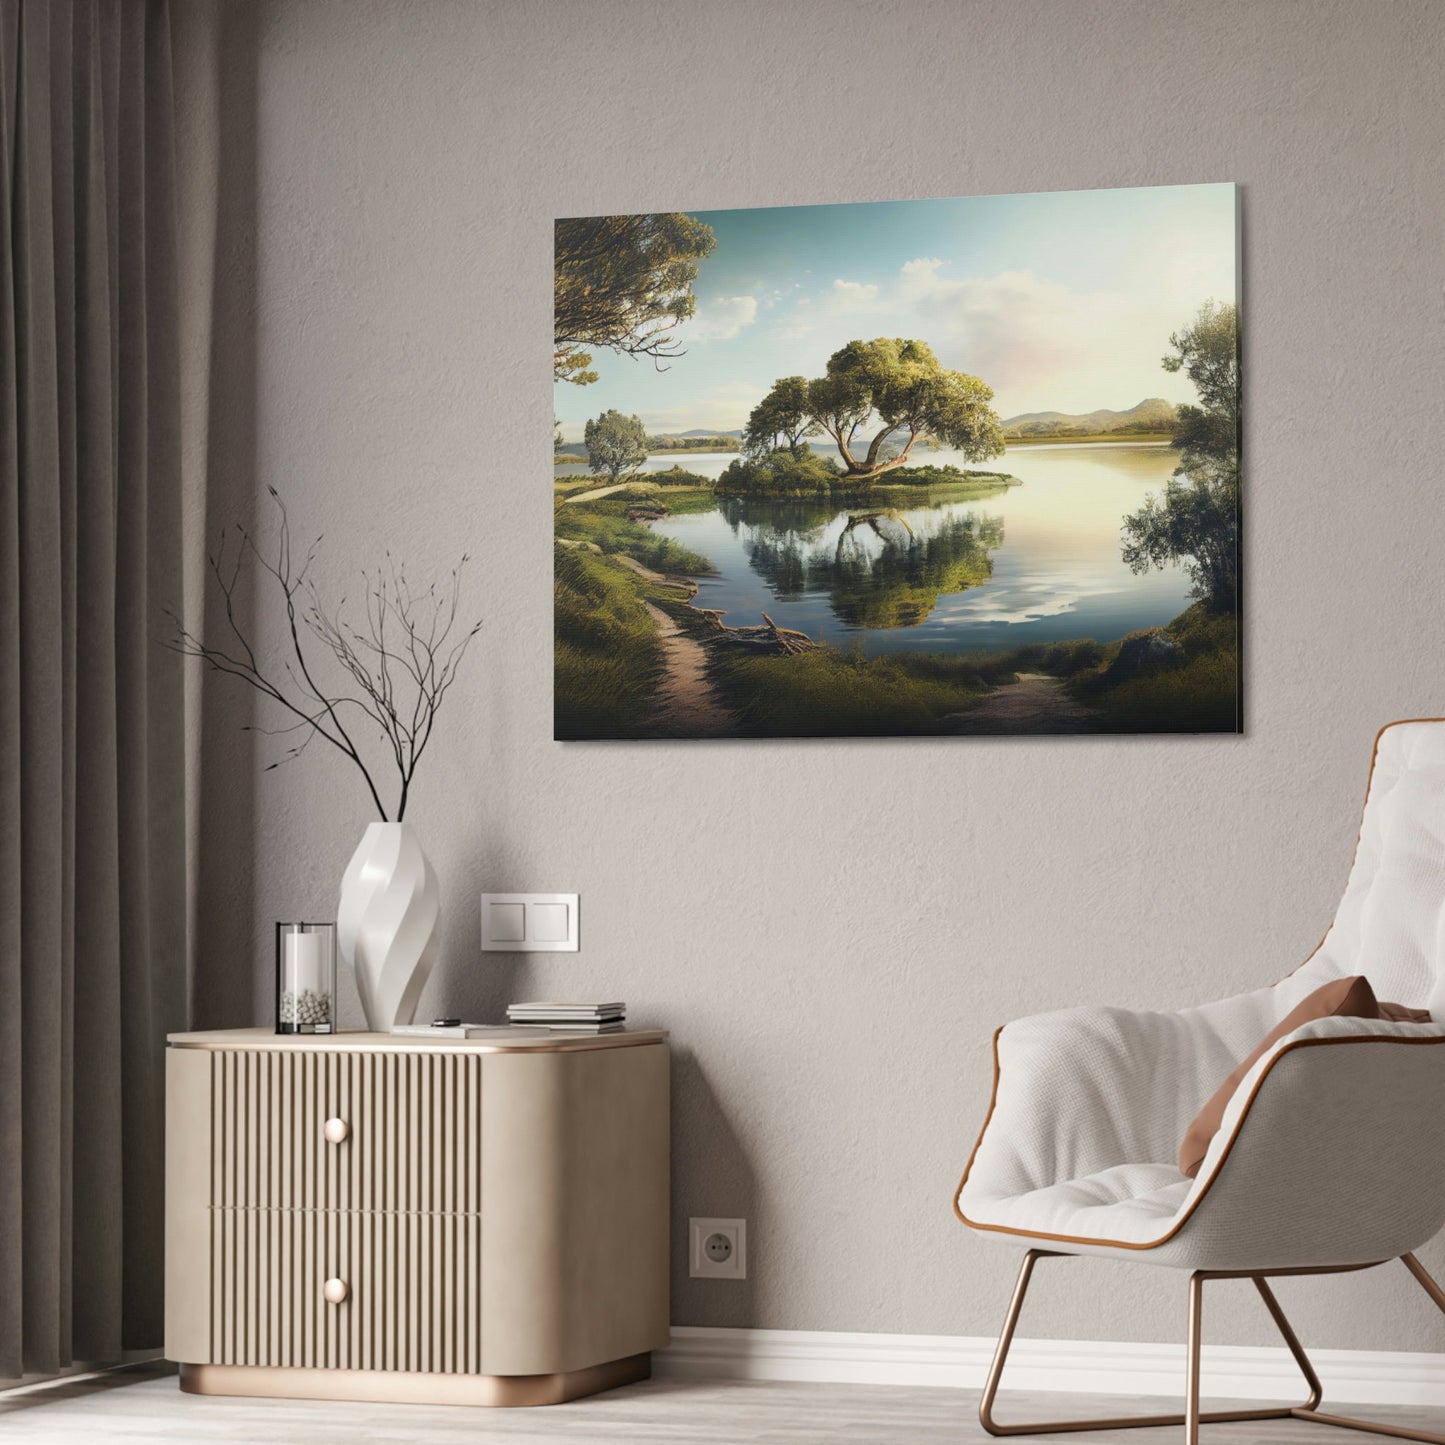 Lakeside Beauty: Print on Canvas of a Gorgeous Lake View